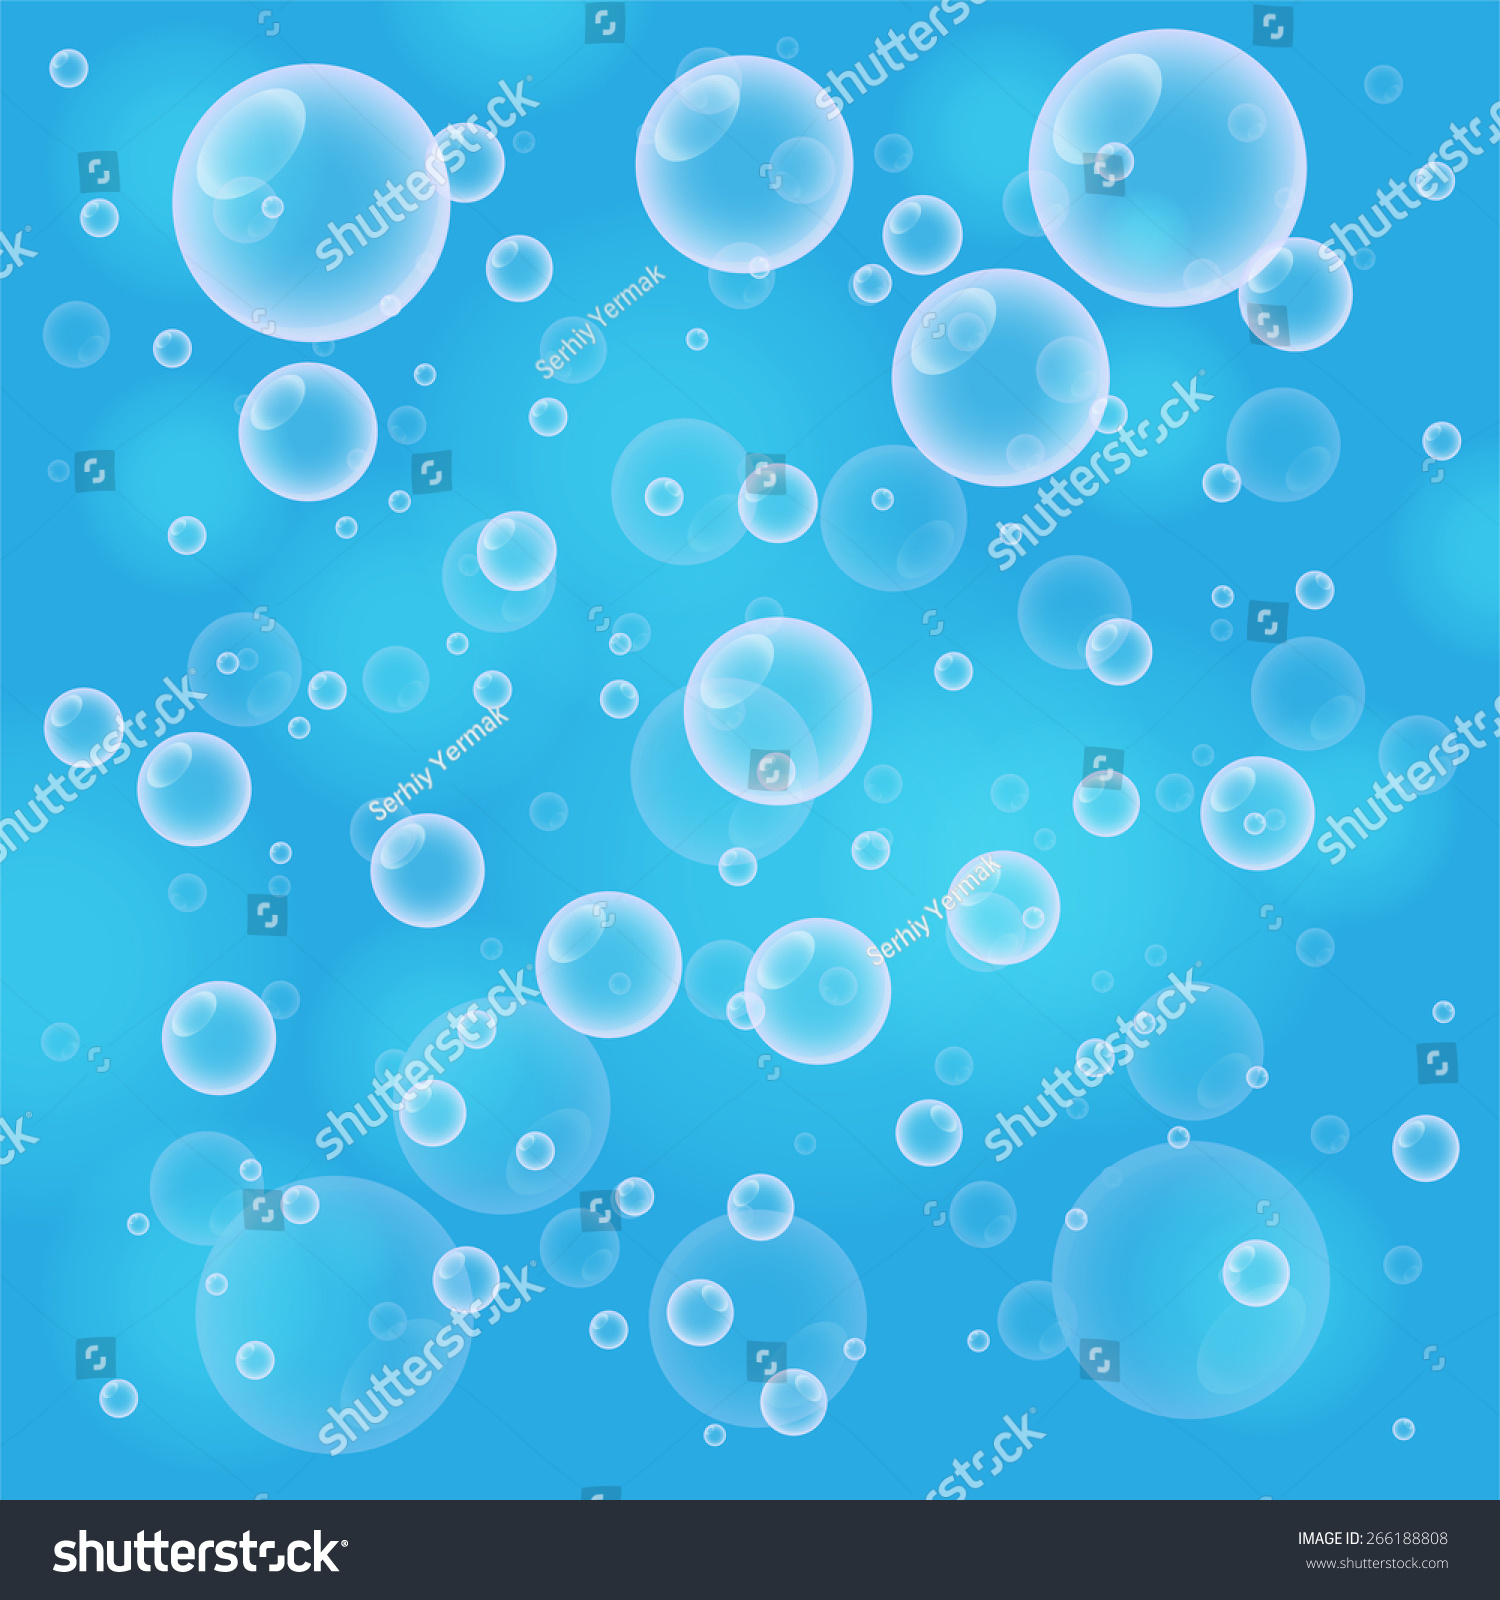 Abstract Blue Background Bubbles Wallpaper Stock Vector 266188808